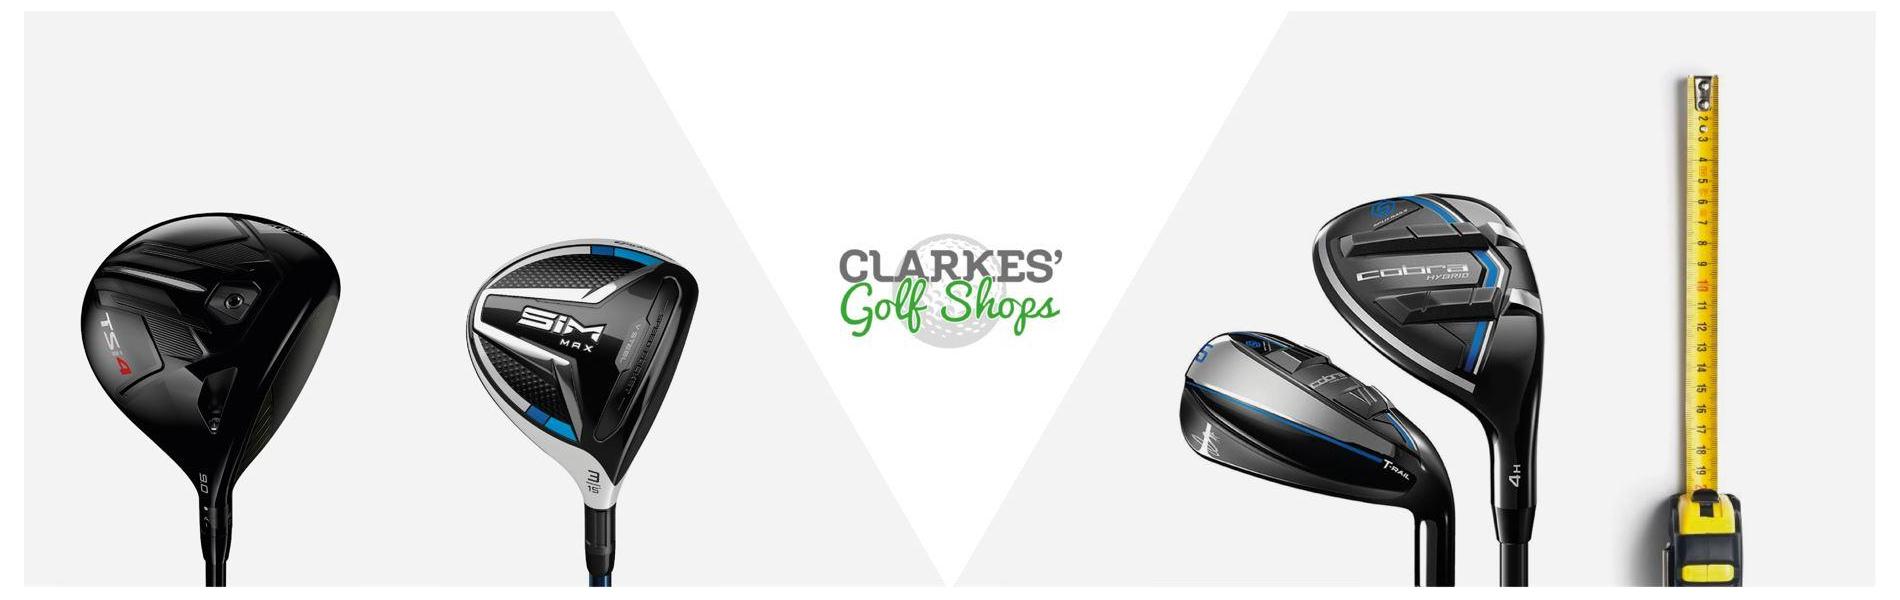 How to measure your ideal club length - Clarkes Golf